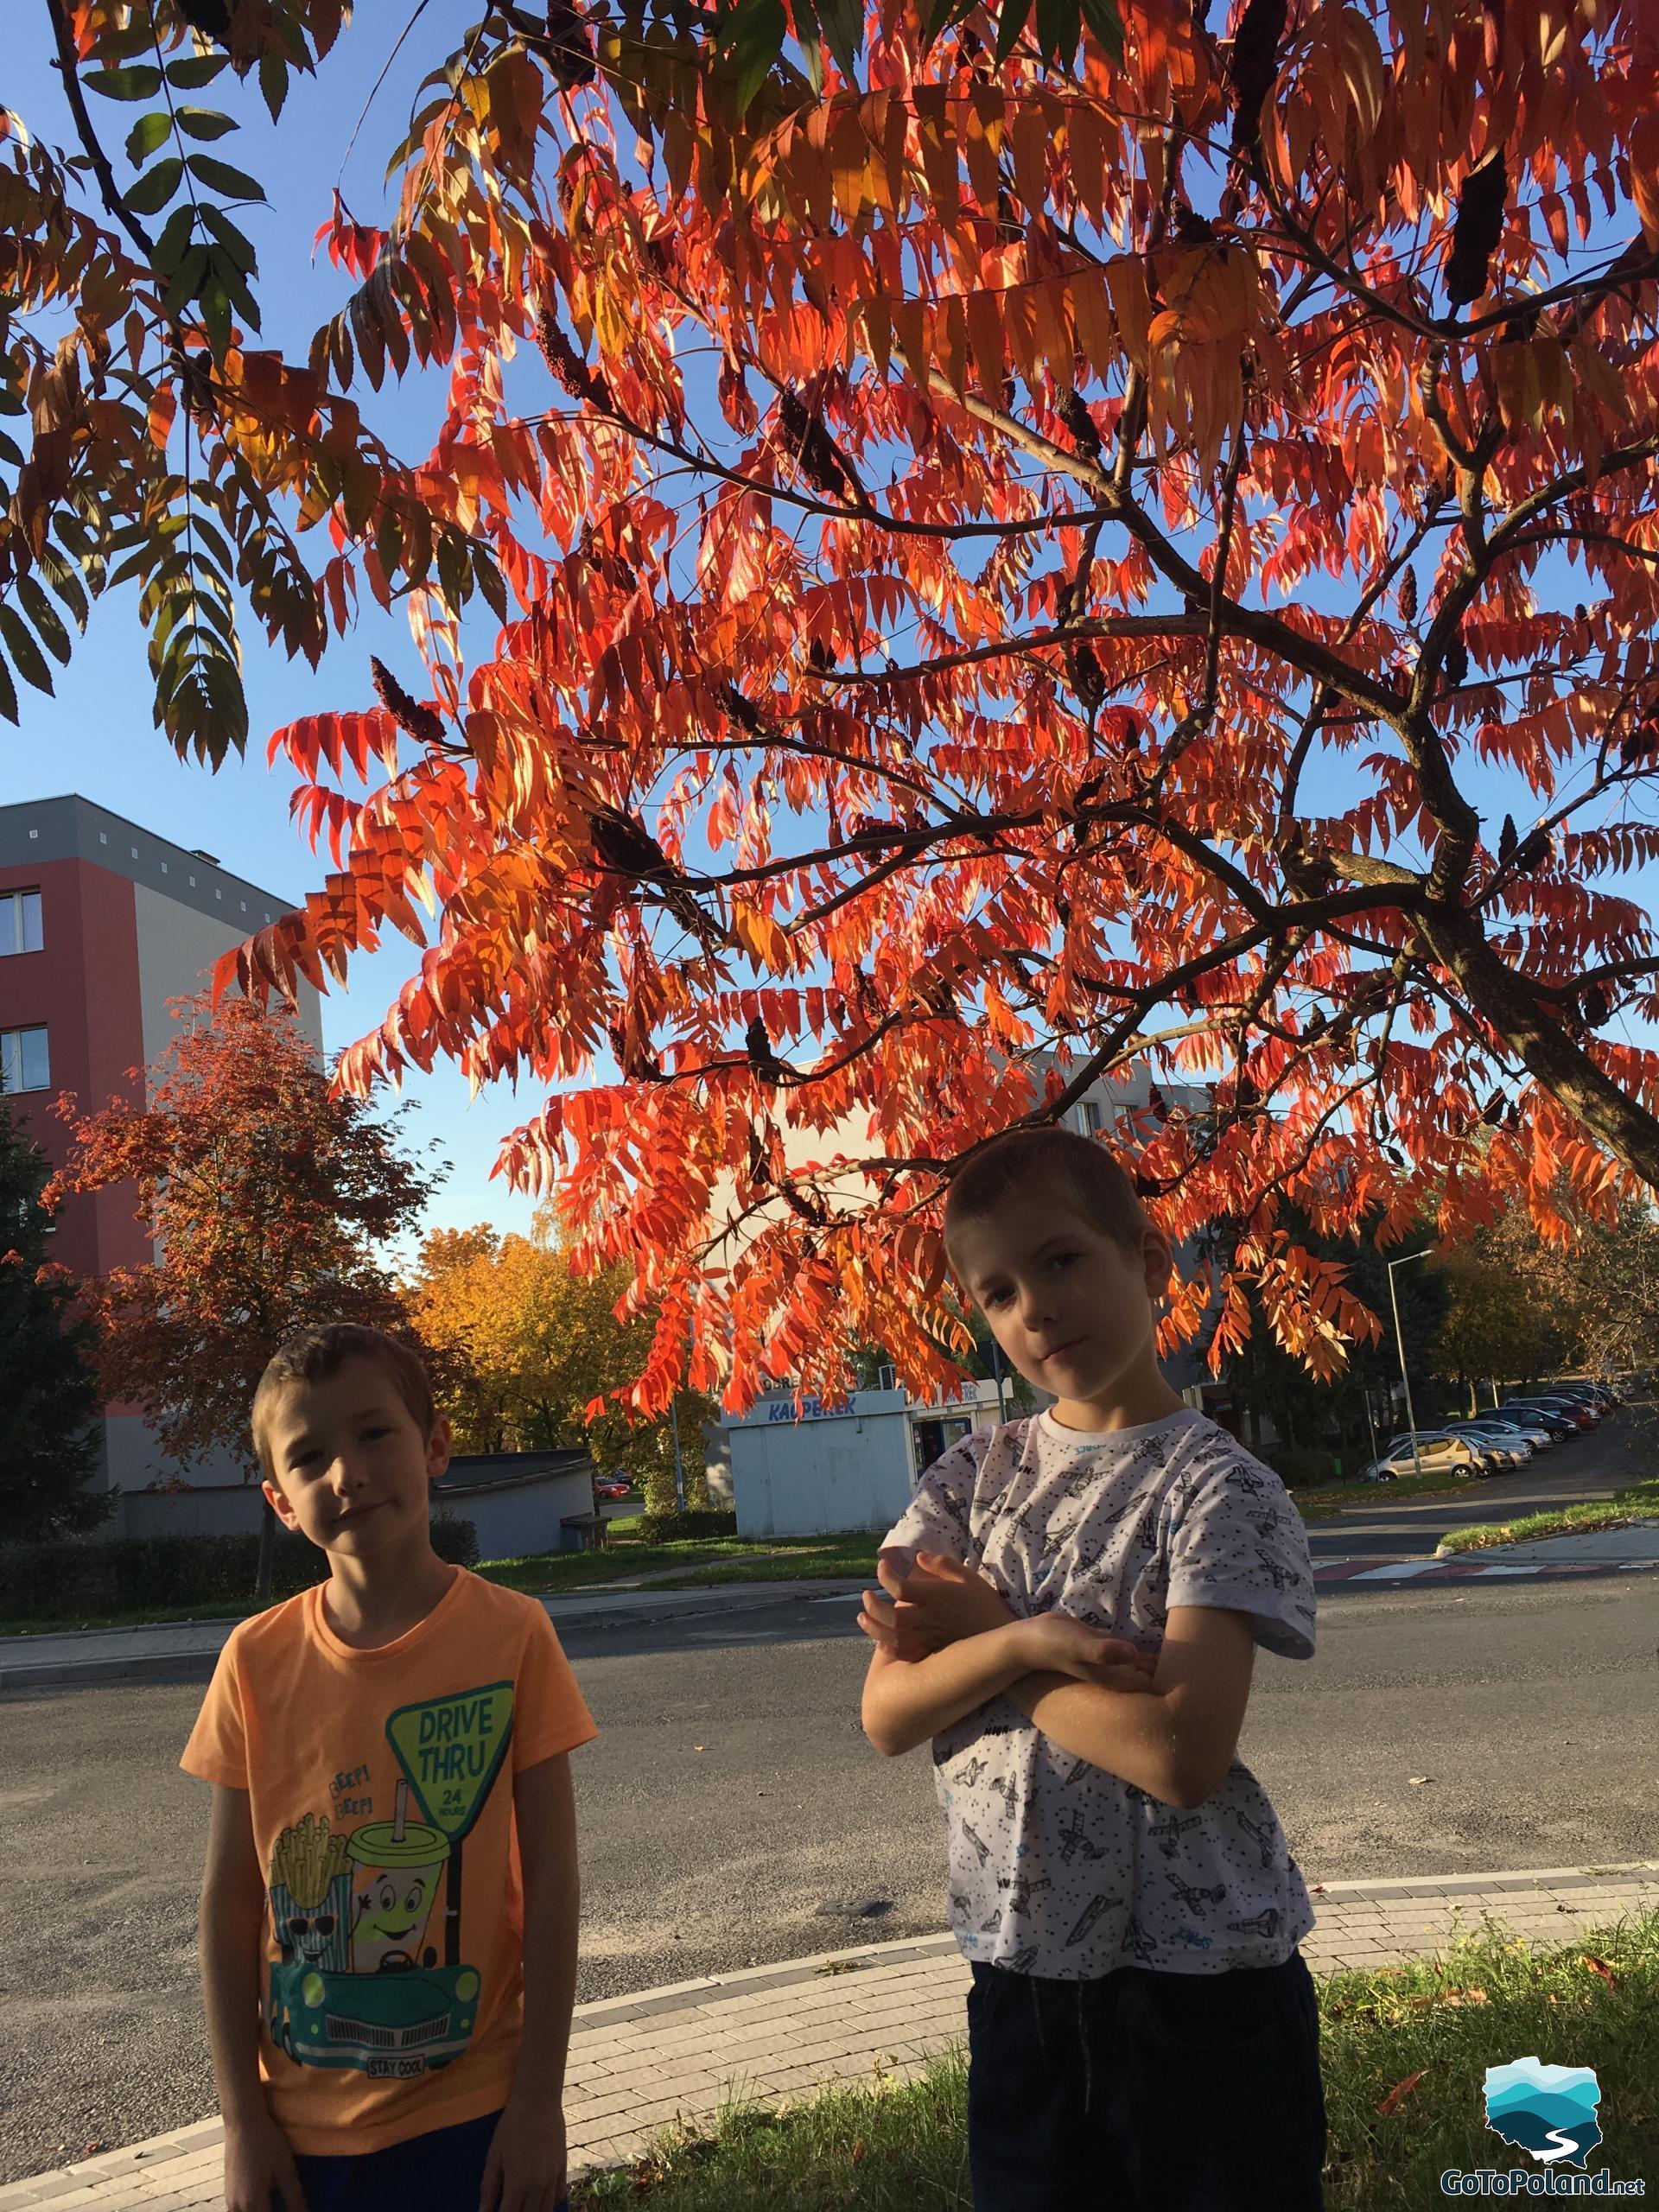 Two small boys who are standing under the tree with red leaves